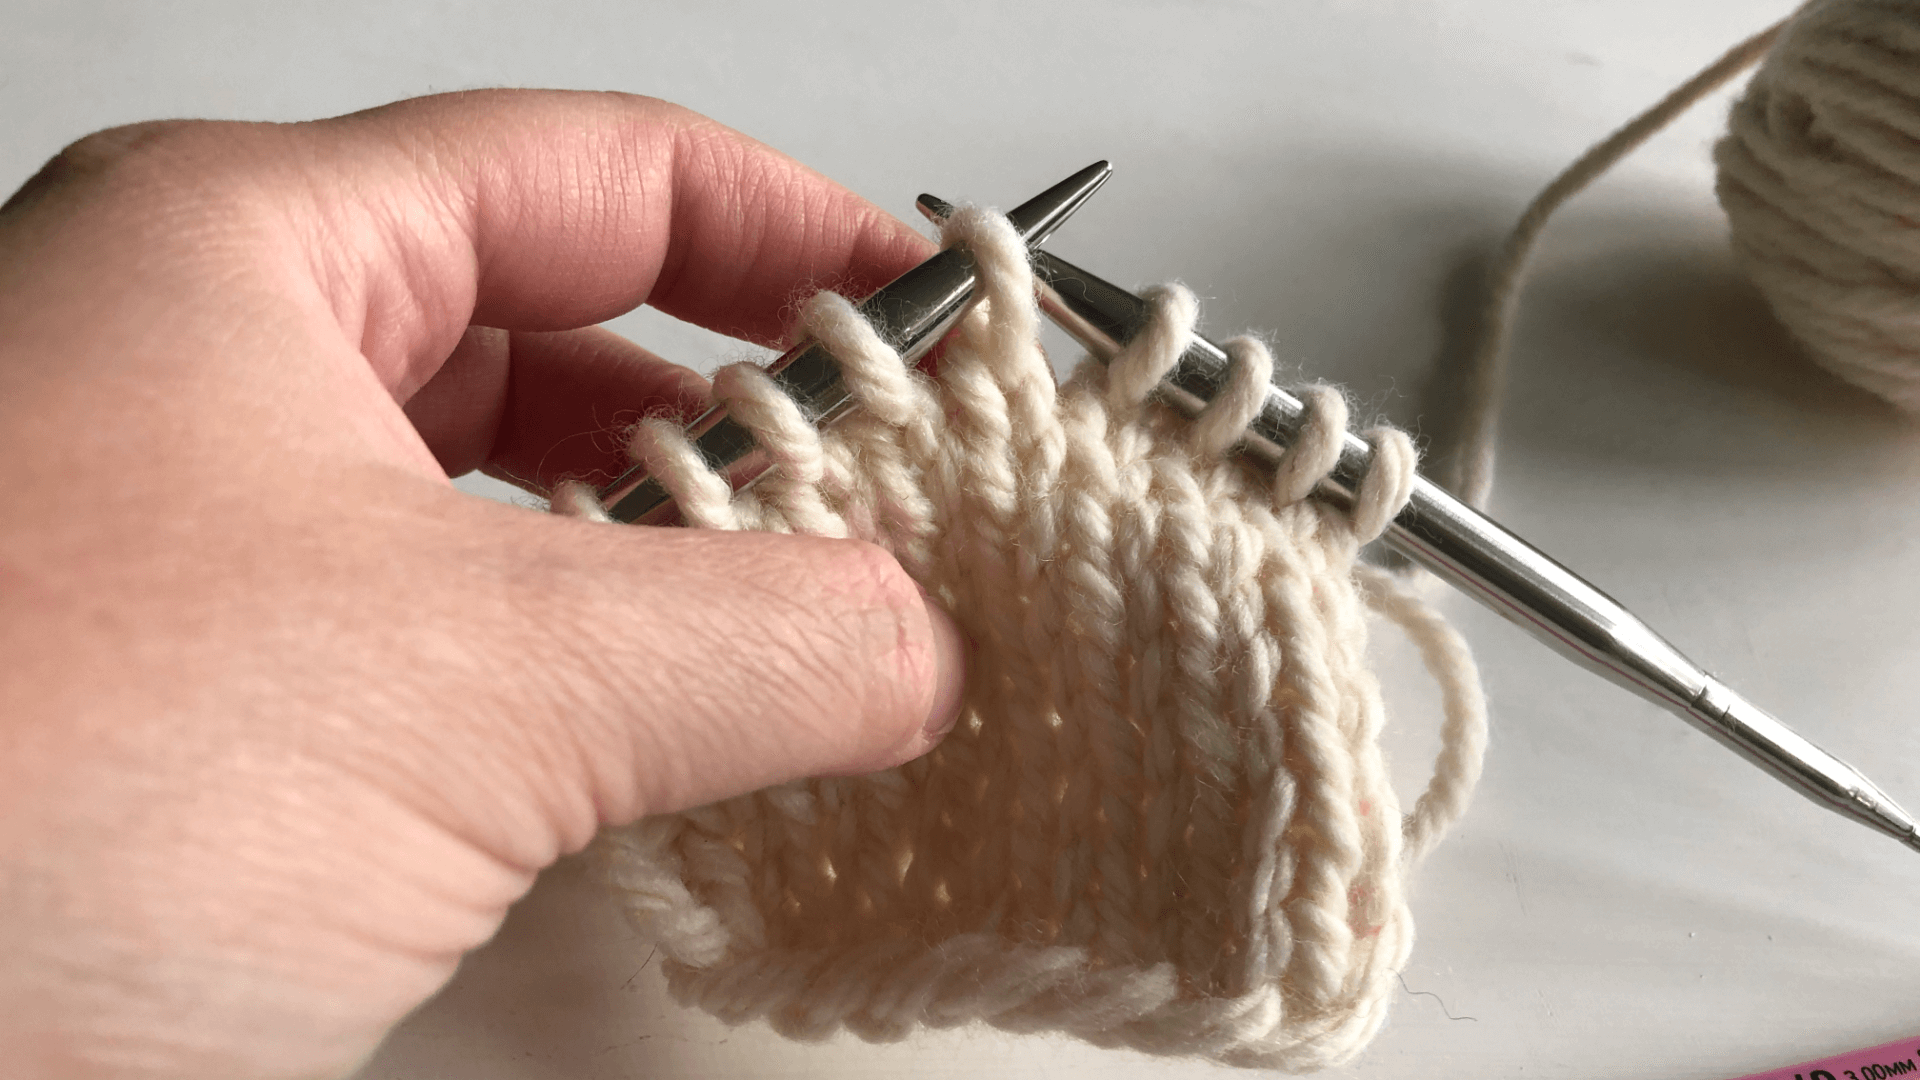 Put the dropped stitch back on the needle with the right leg in front of the needle tip.